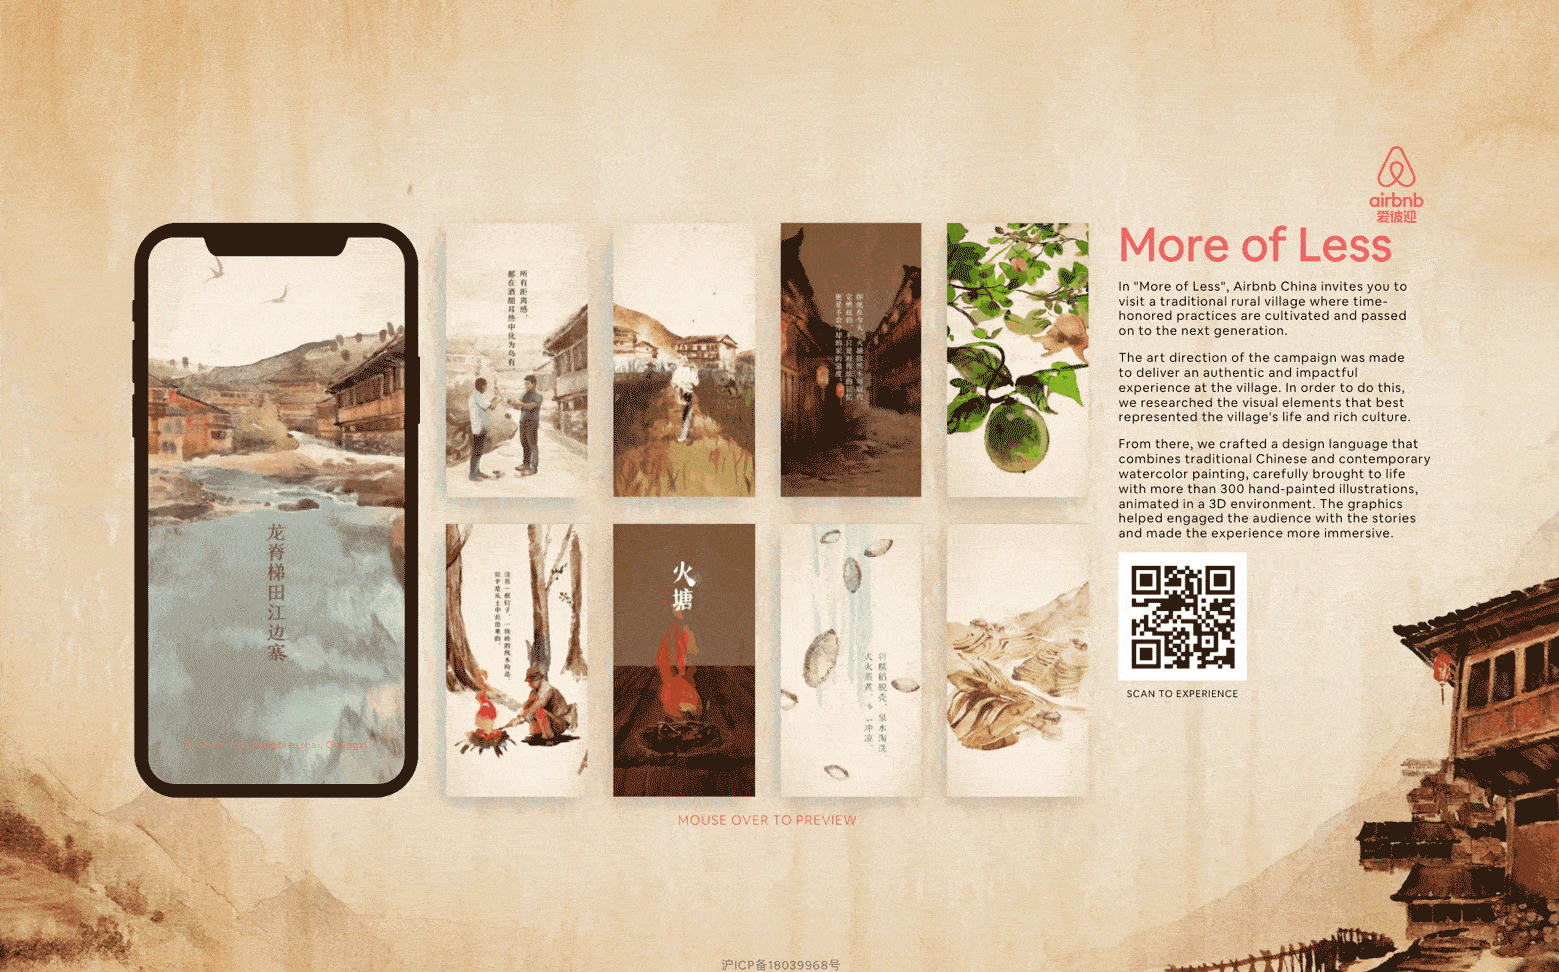 The More of Less campaign for AirBNB China brings Chinese water-color into the digital world